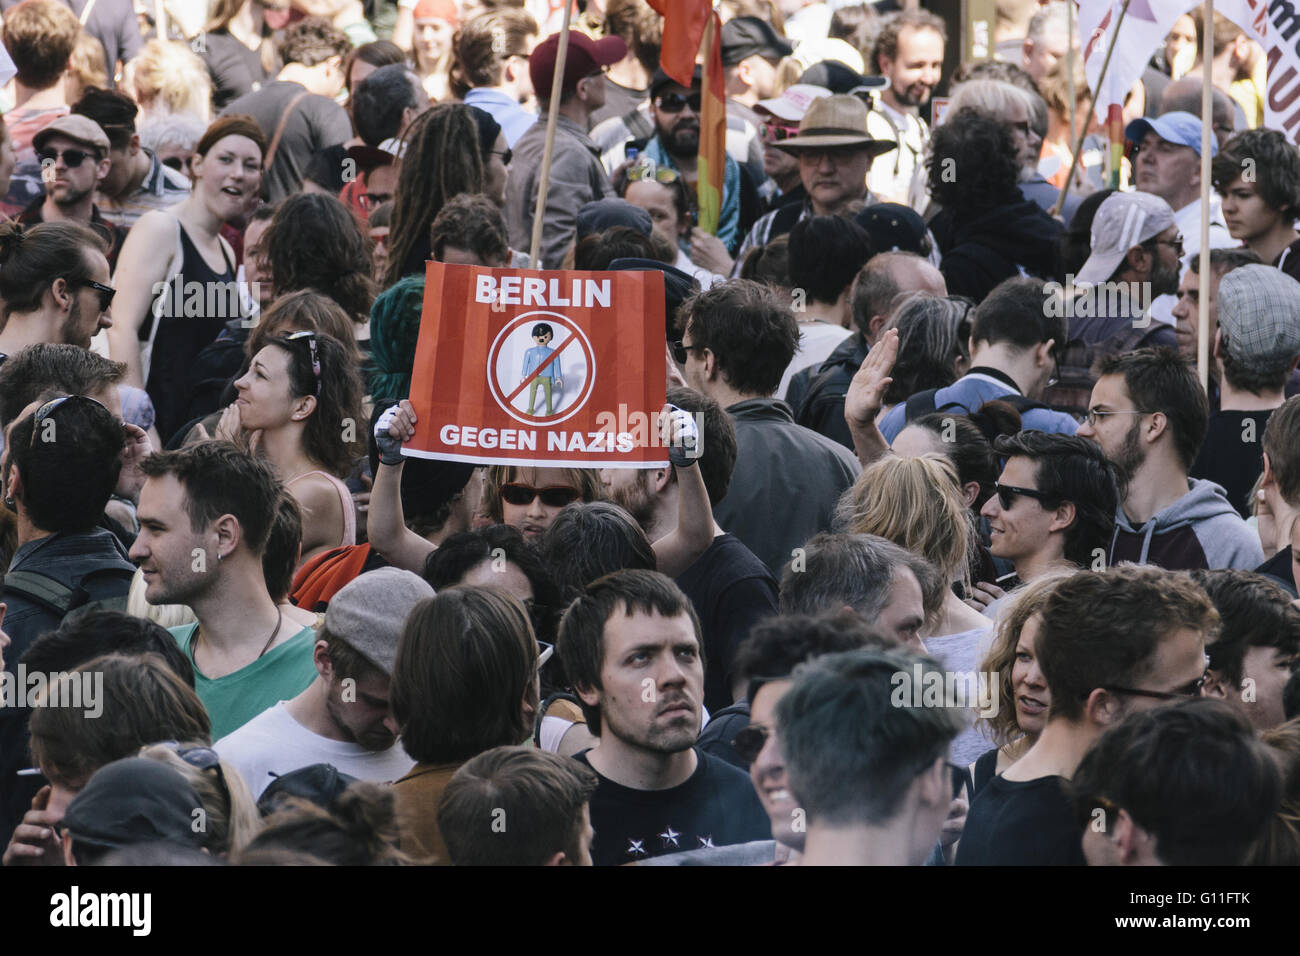 Berlin, Berlin, Germany. 7th May, 2016. Protesters gather at Hackescher Markt during the counter protests against the rally held under the motto 'Merkel muss weg![Merkel must go]' organised by far-right group 'We for Berlin & We for Germany' Credit:  Jan Scheunert/ZUMA Wire/Alamy Live News Stock Photo